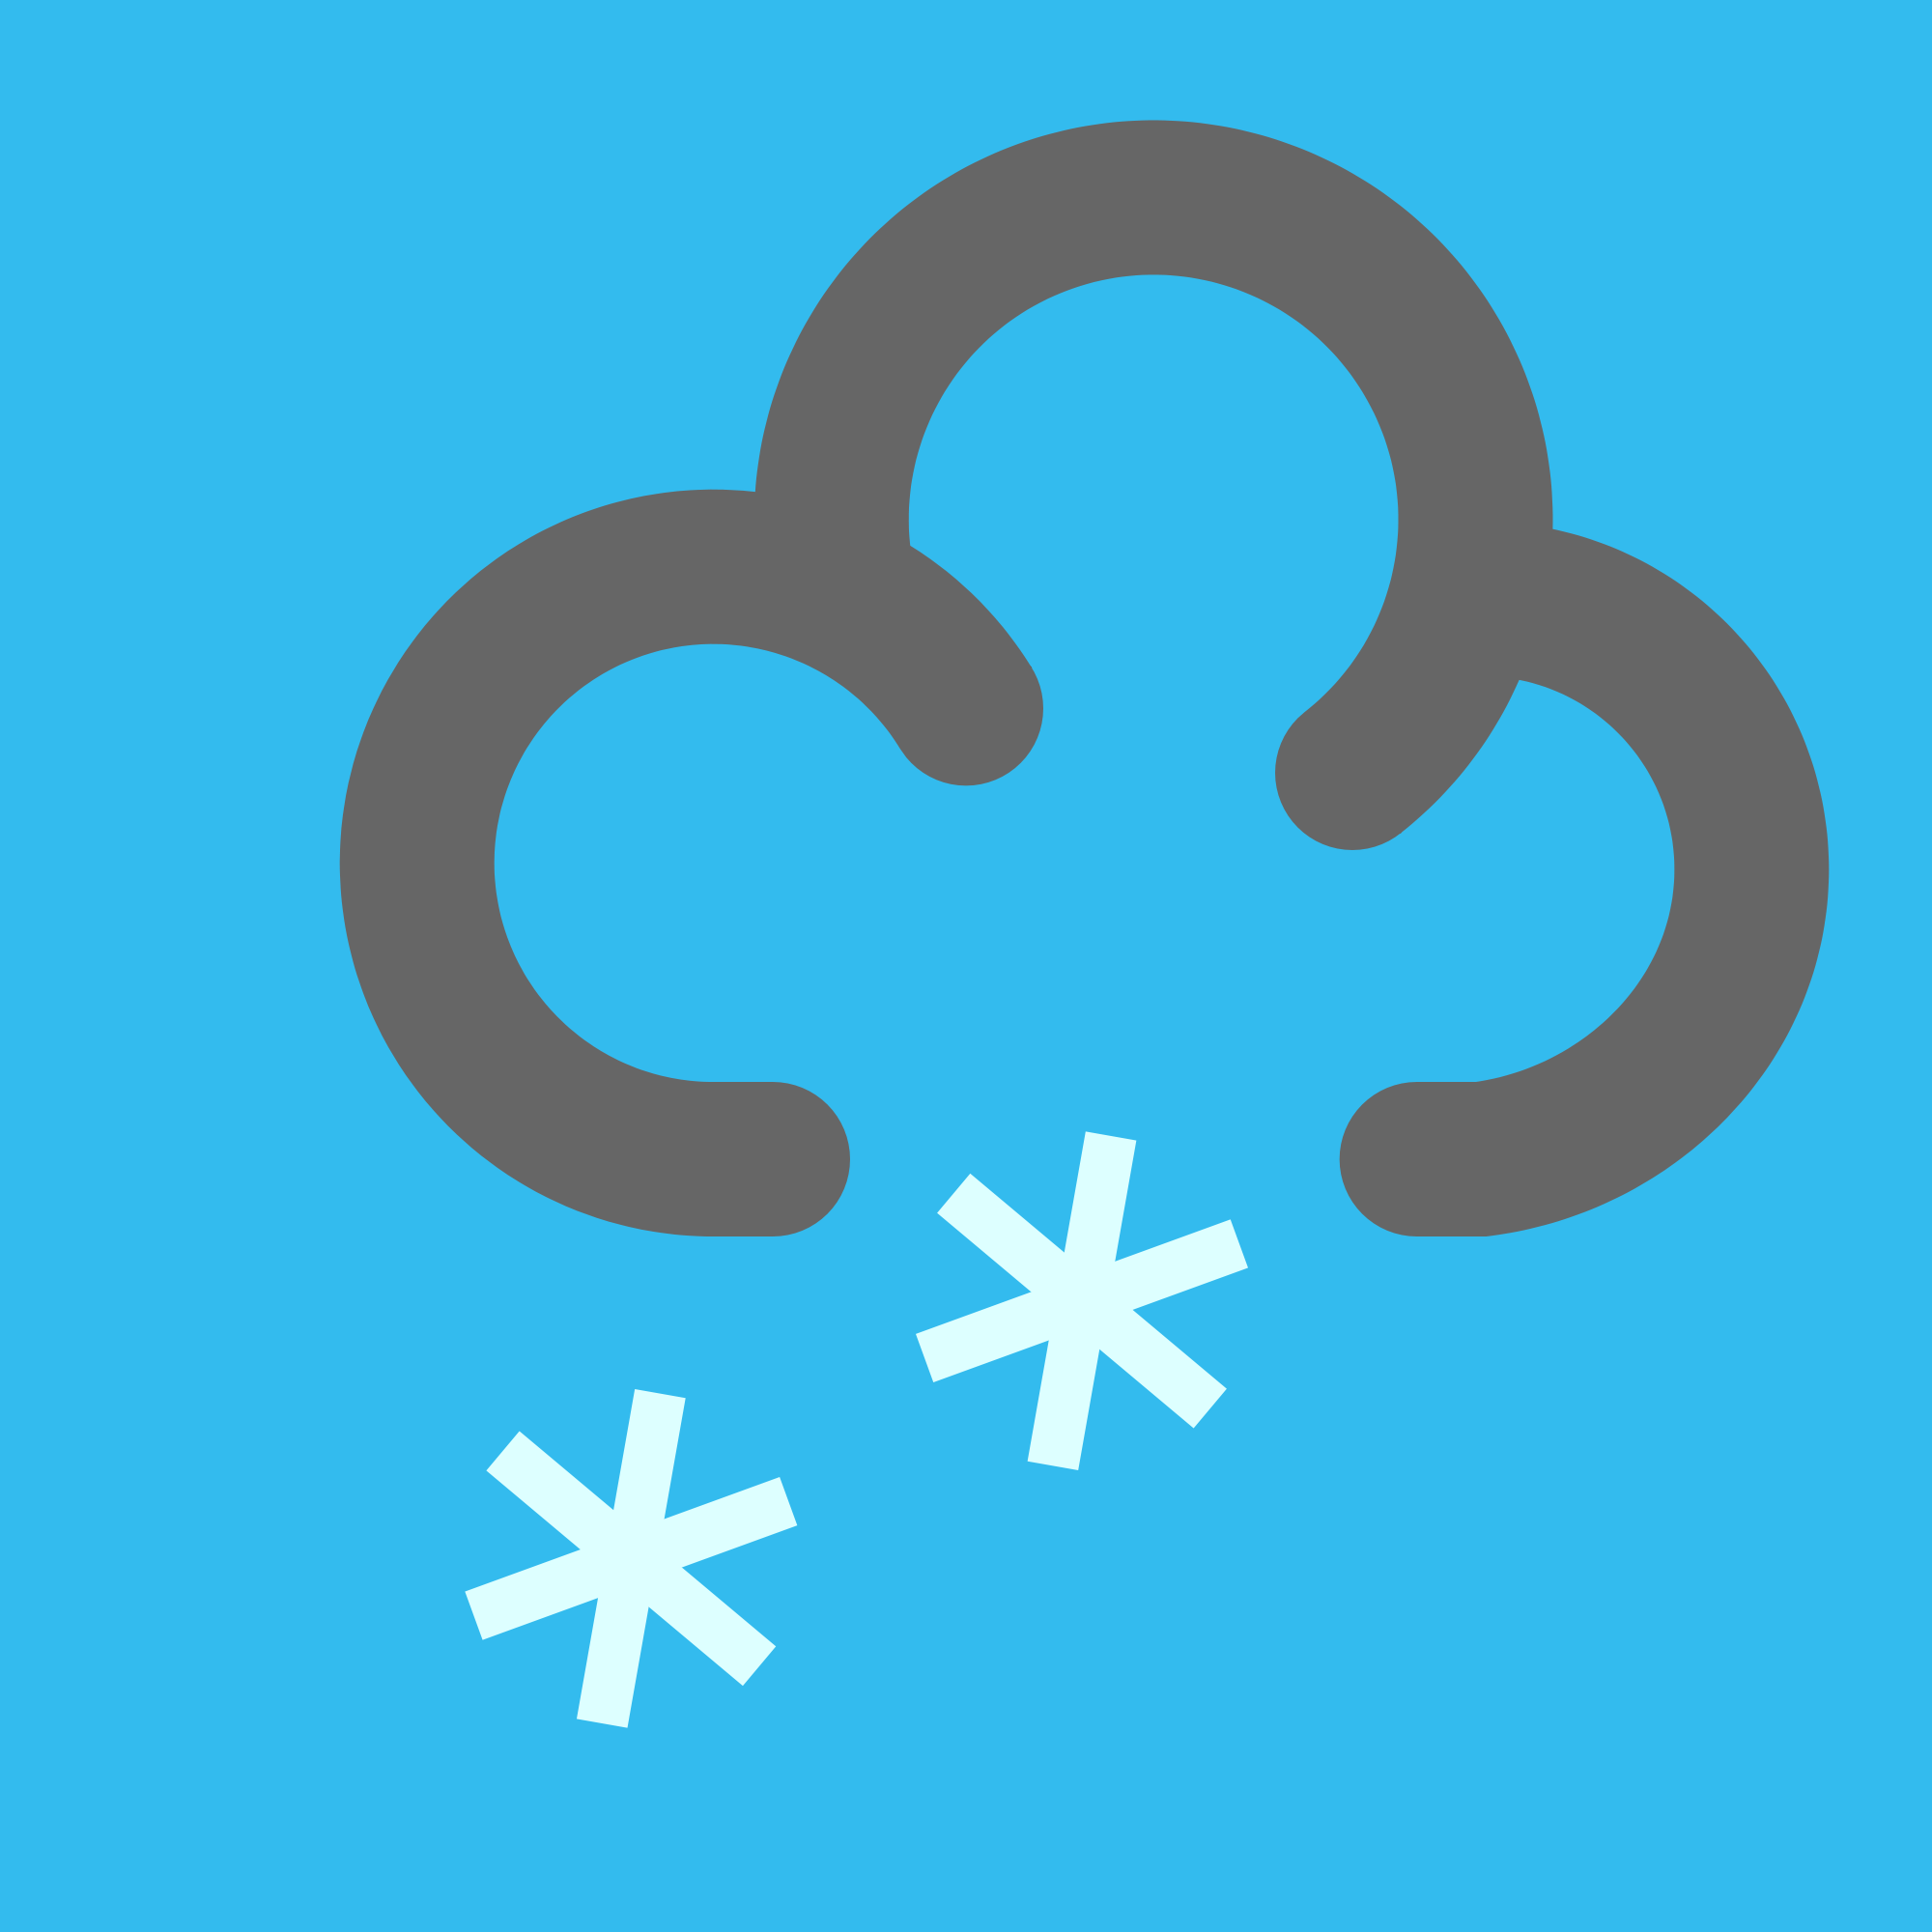 Snow svg #10, Download drawings